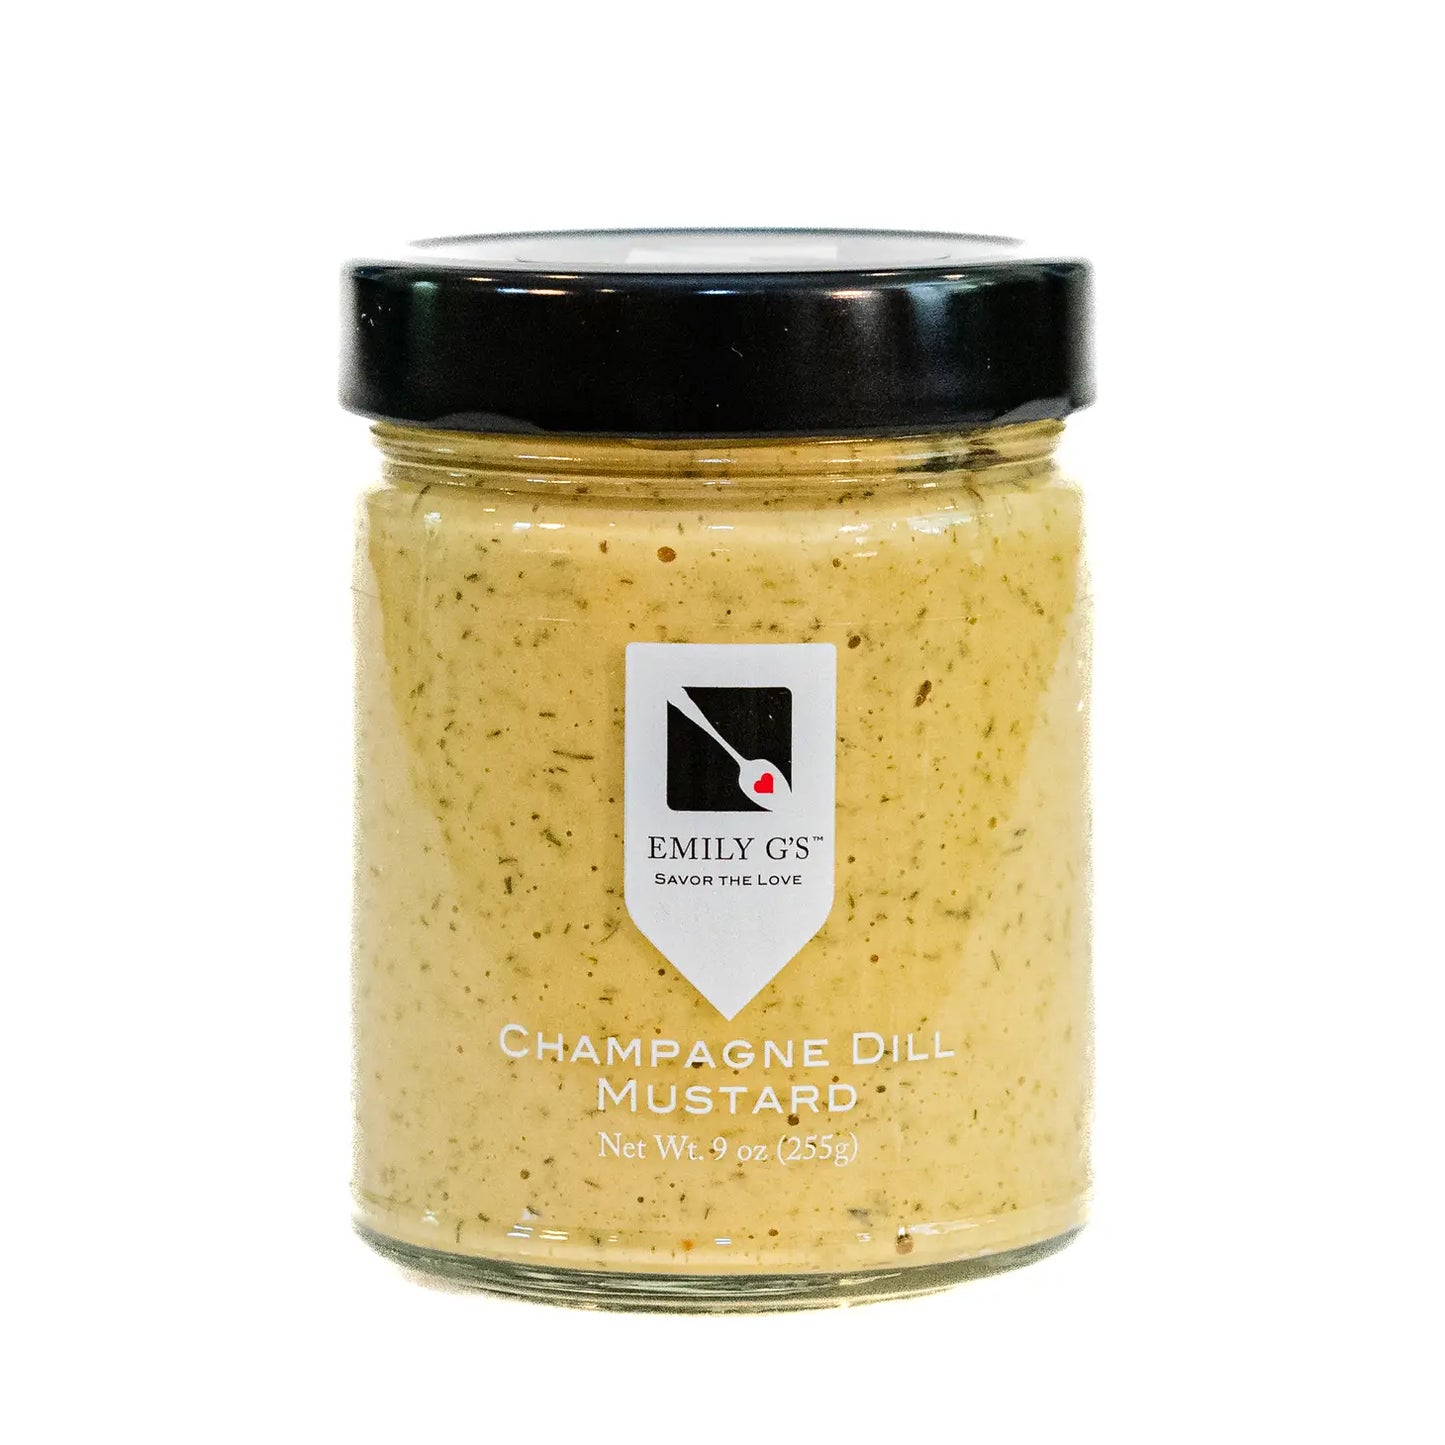 Champagne Dill Mustard - Emily G's